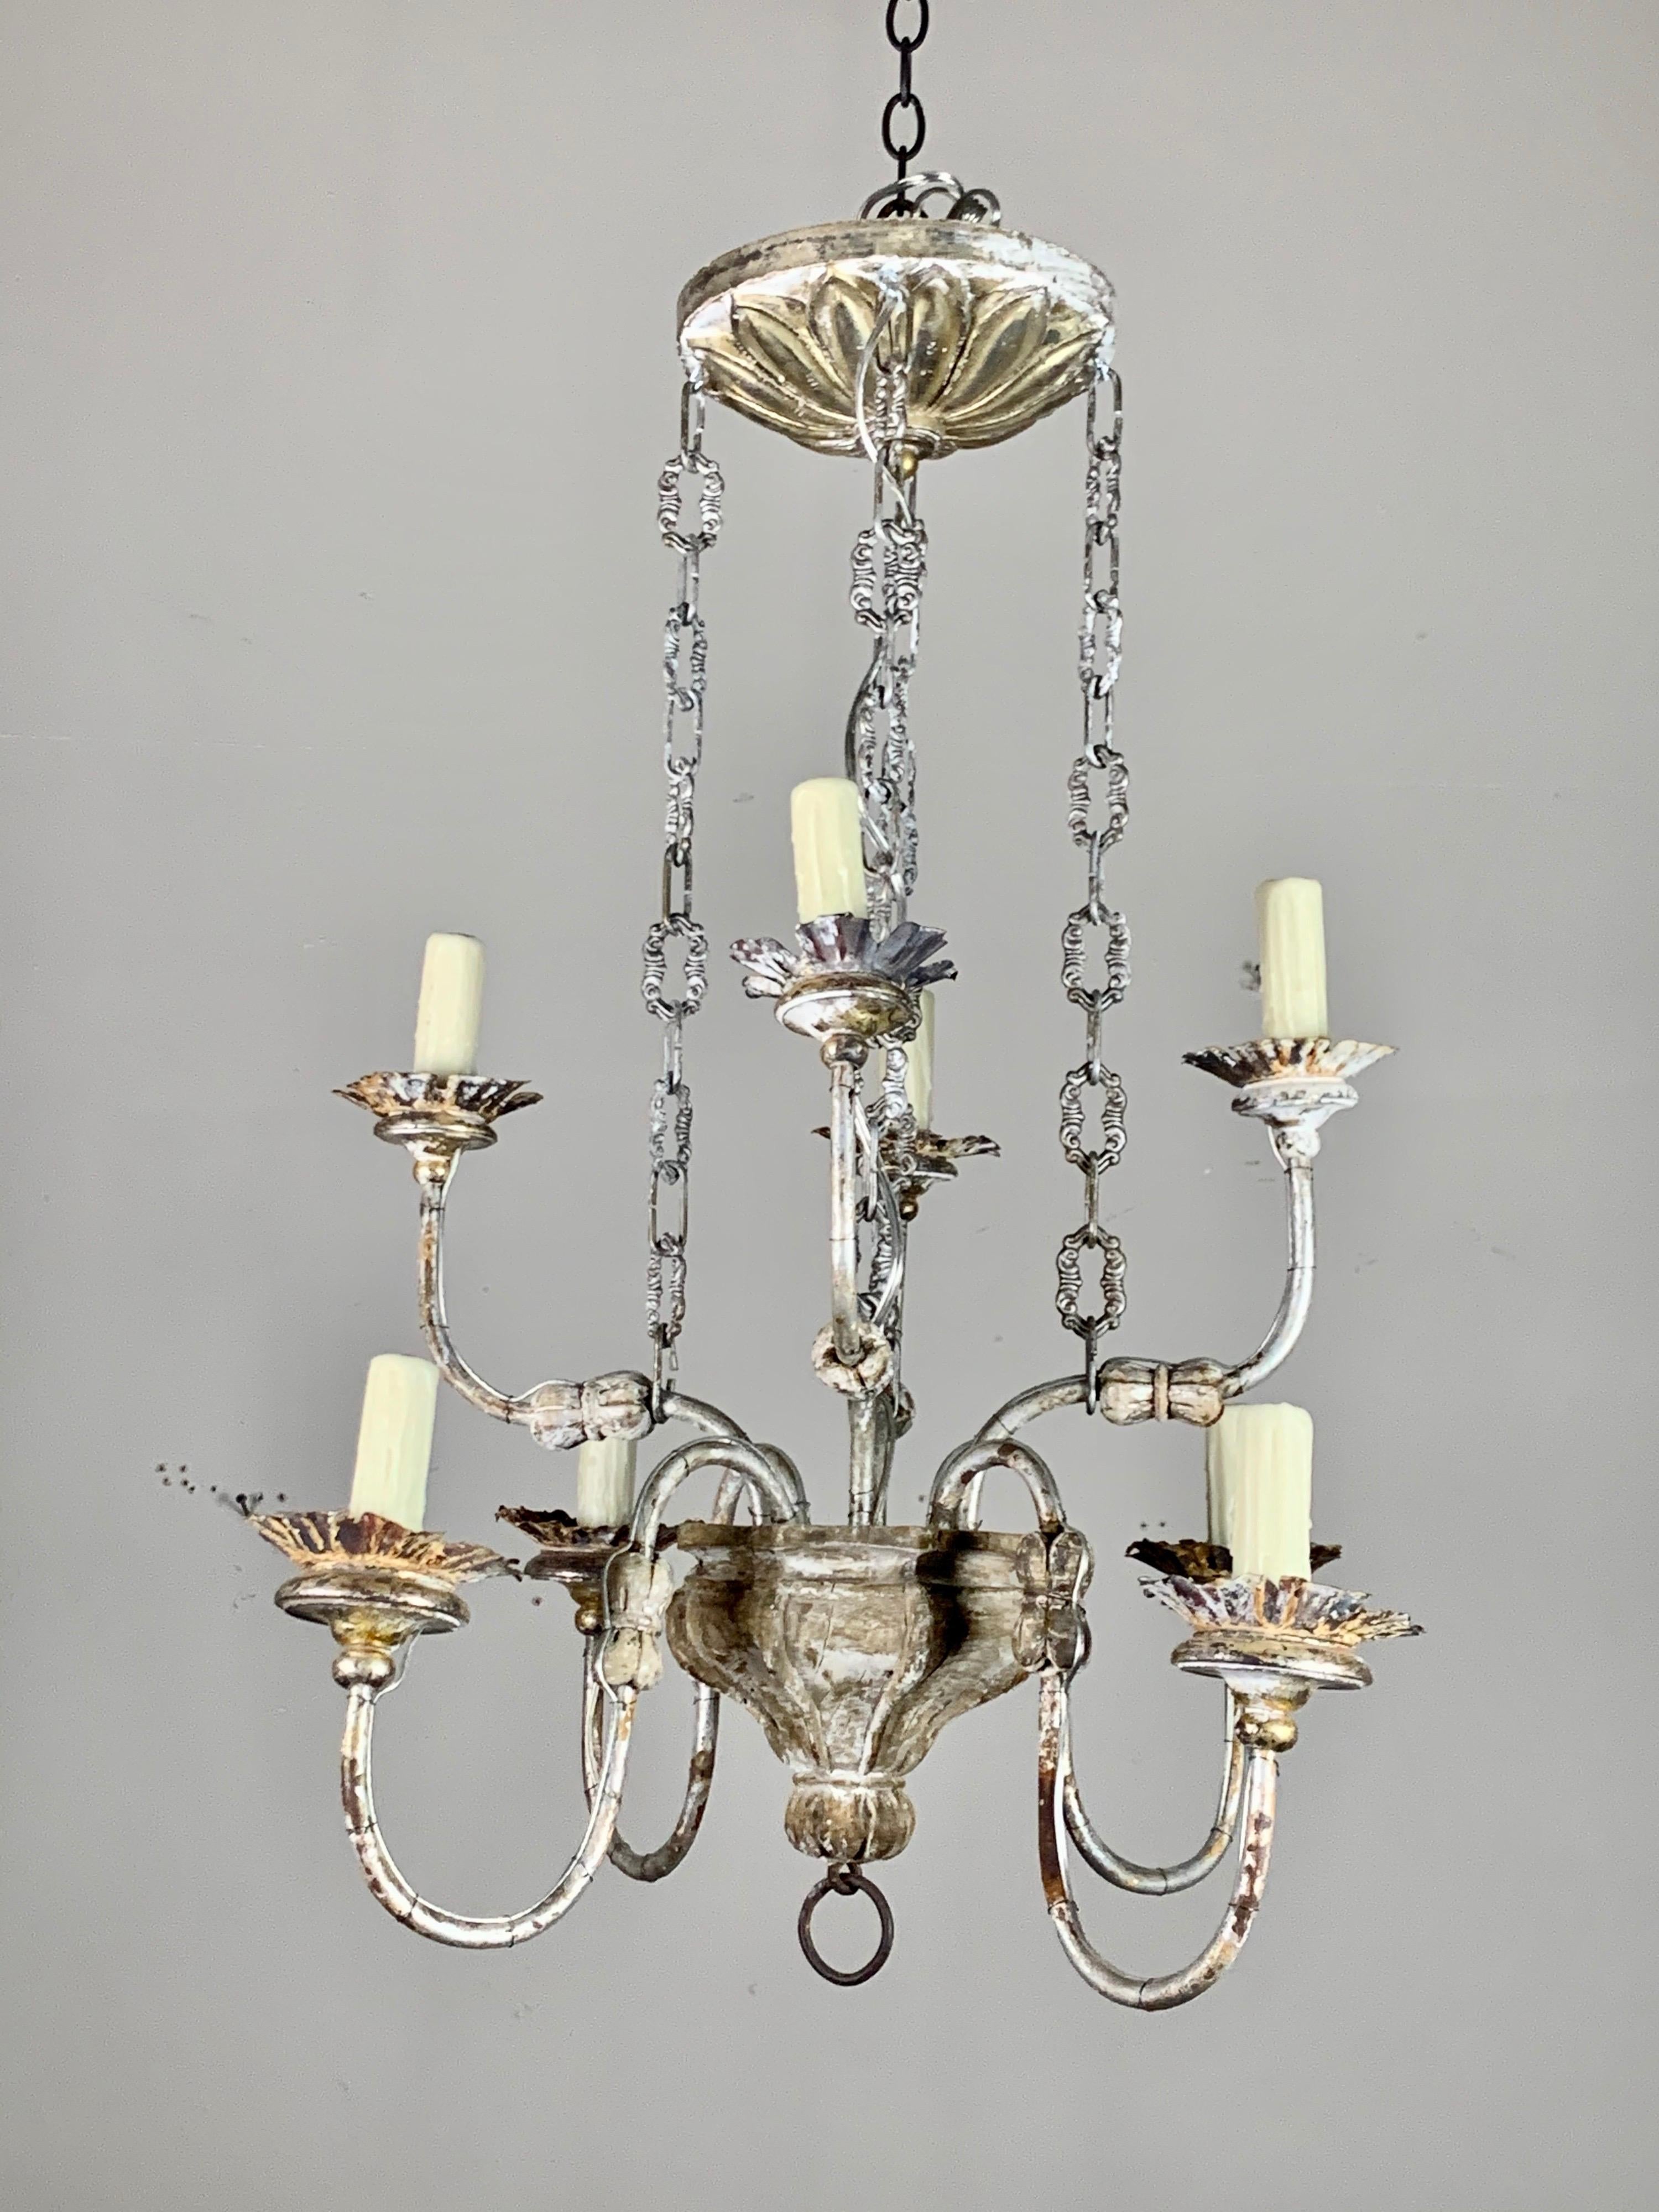 Two-tier Italian silvered eight-light chandelier caved in wood with metal arms and chain. The fixture is newly rewired with grip wax candle covers. Includes chain and beautiful hand carved giltwood canopy.